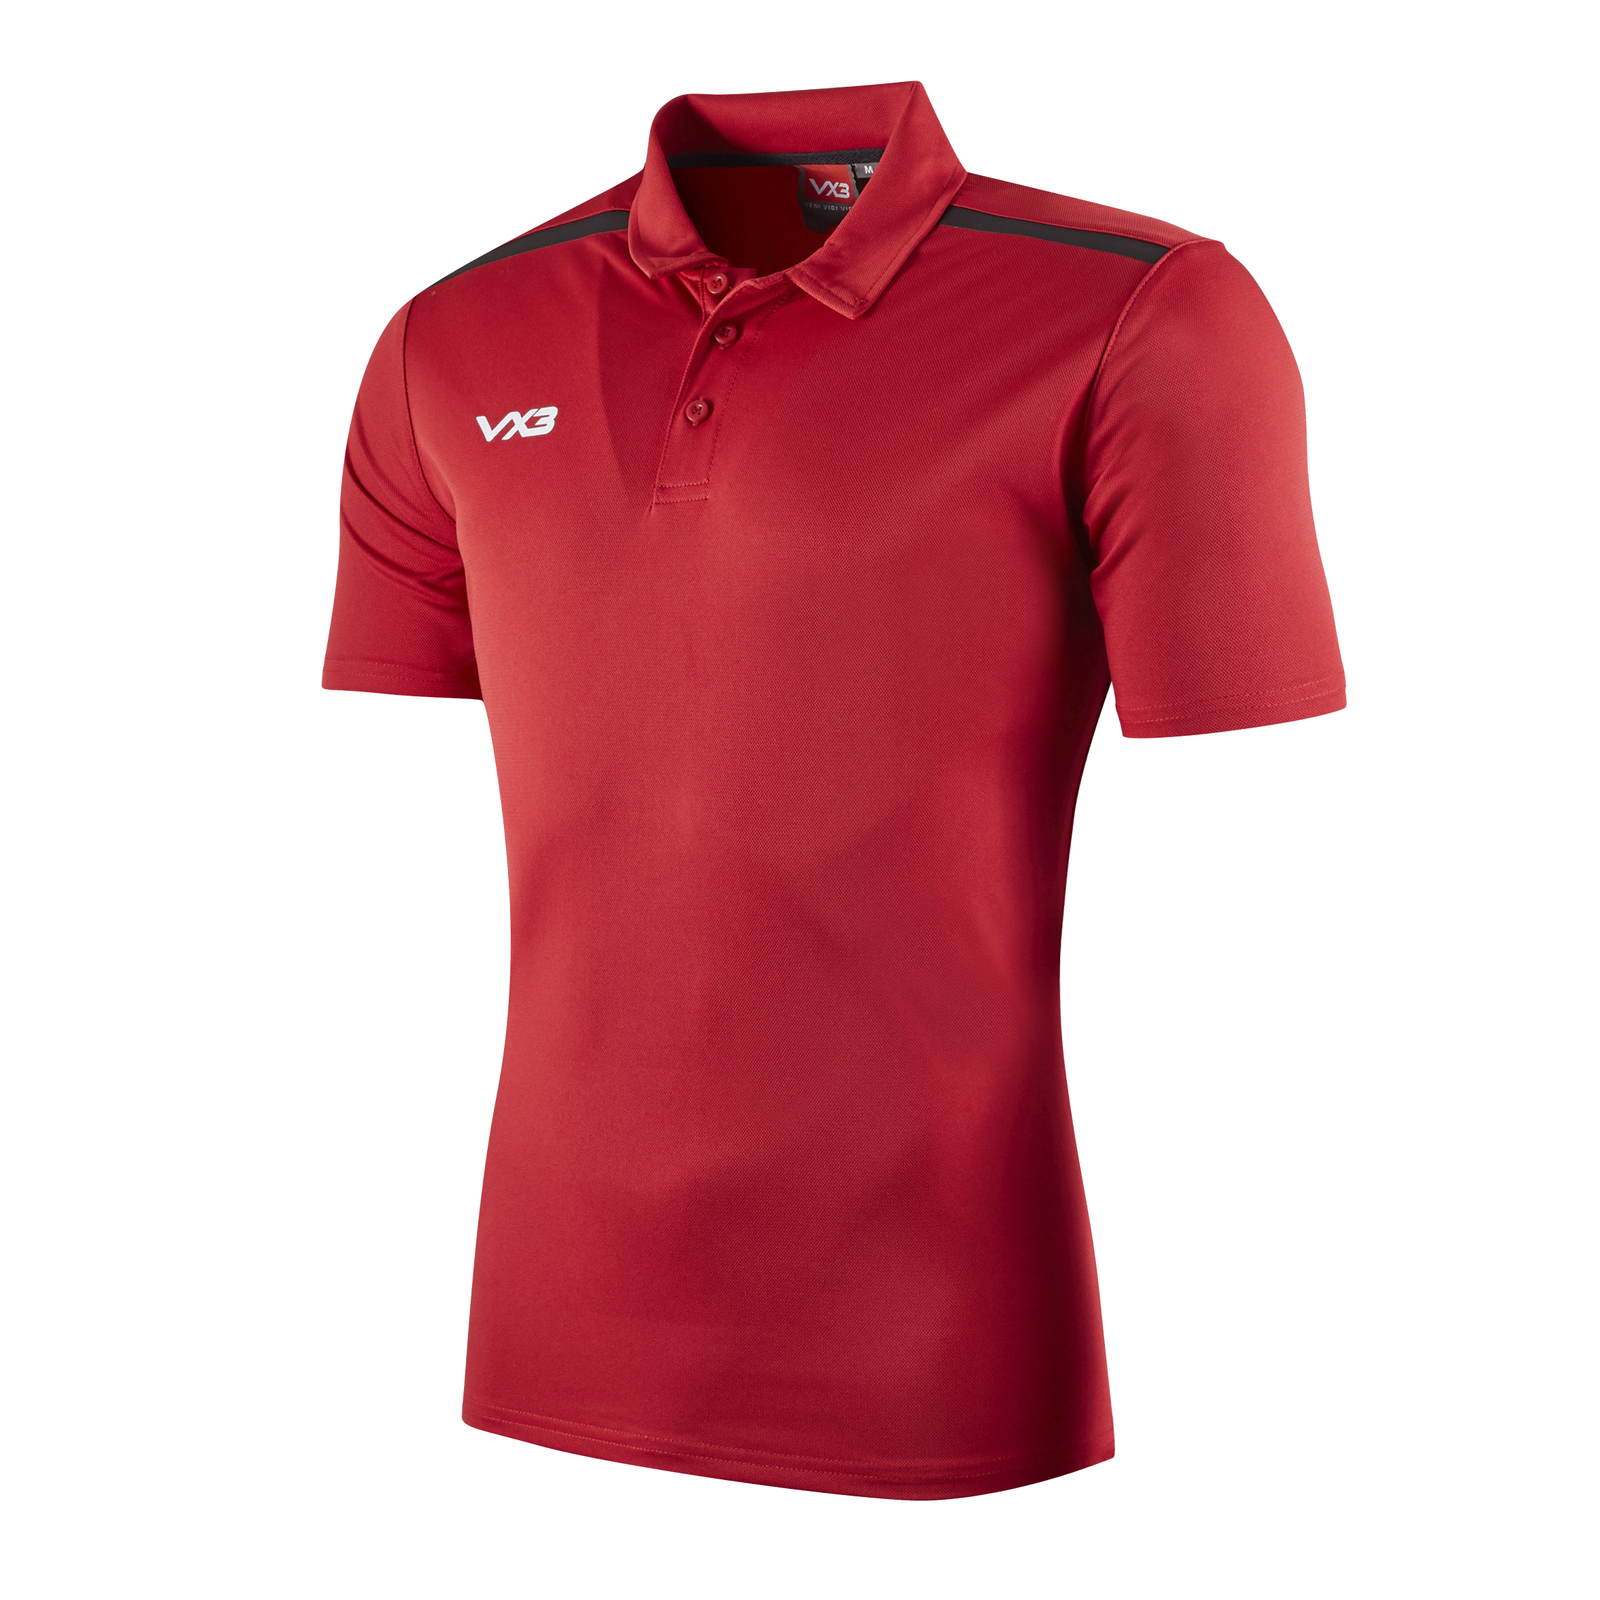 Fortis Polo Red/Black